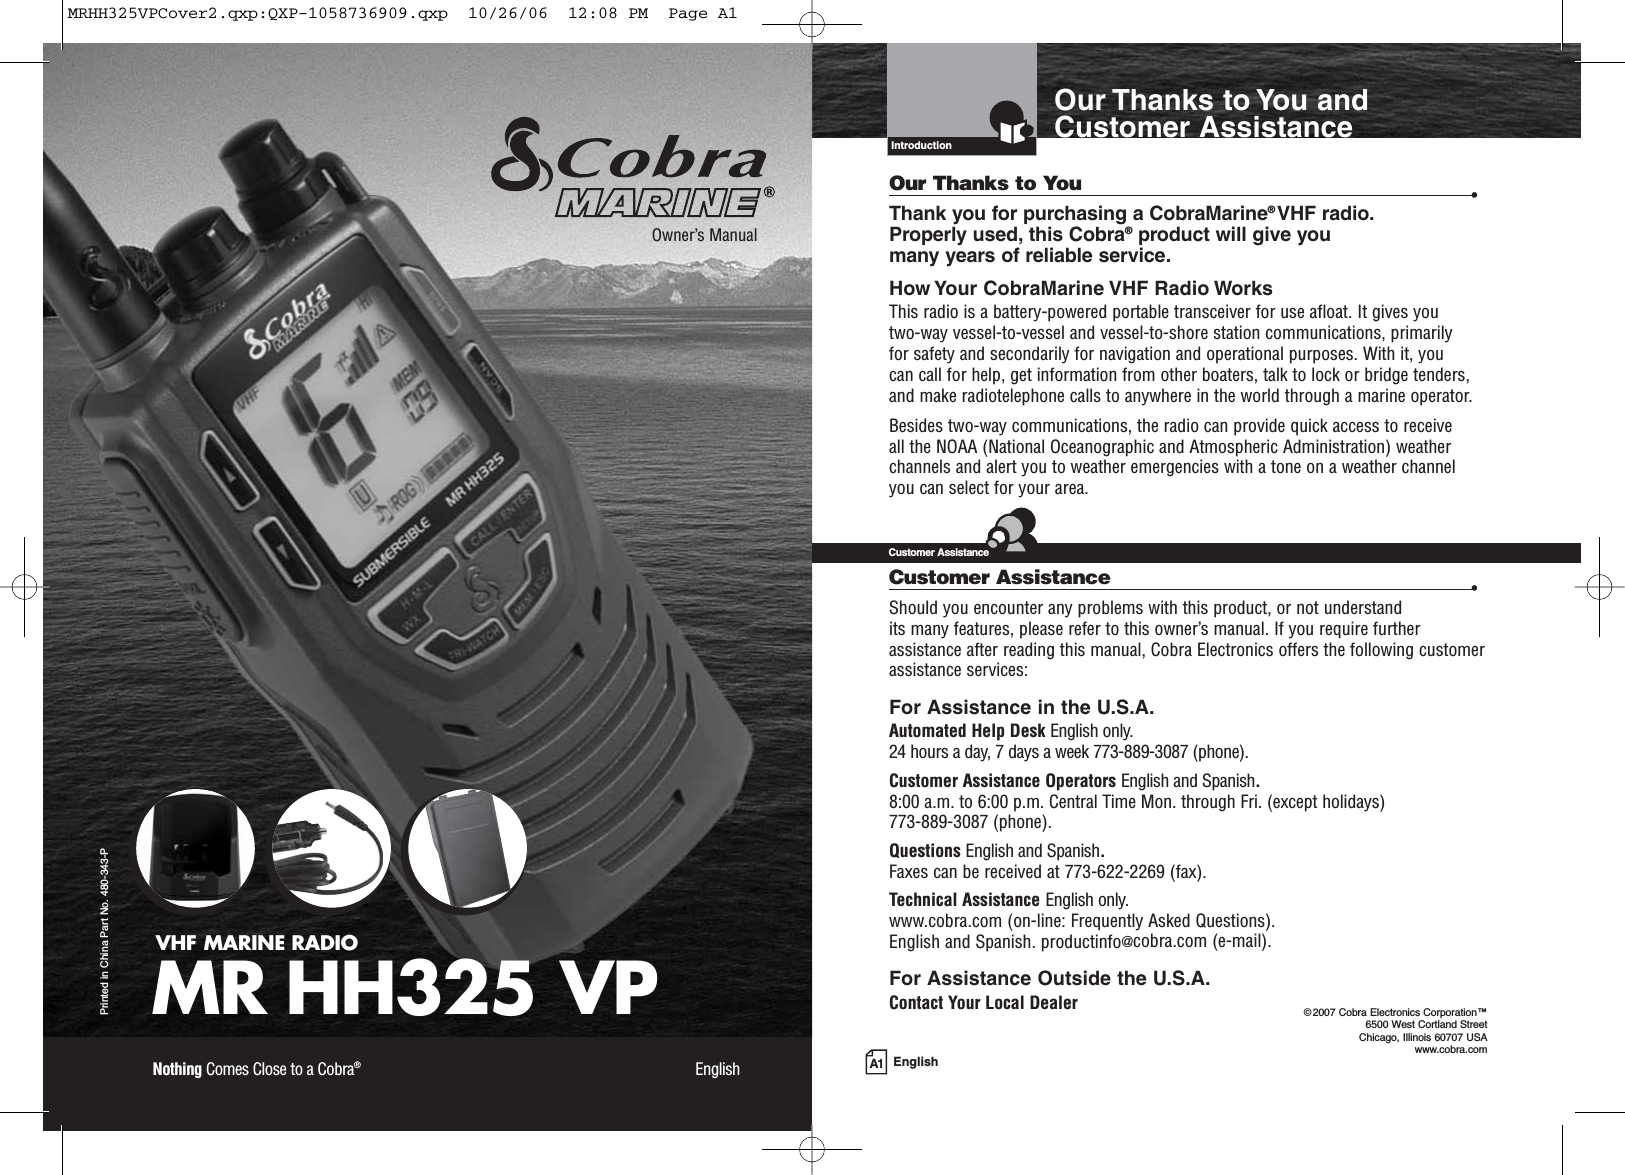 A1 EnglishOur Thanks to You andCustomer AssistanceIntroductionVHF MARINE RADIOMR HH325 VPPrinted in China Part No. 480-343-POwner’s ManualNothing Comes Close to a Cobra®EnglishOur Thanks to You •Thank you for purchasing a CobraMarine®VHF radio. Properly used, this Cobra®product will give you many years of reliable service.How Your CobraMarine VHF Radio WorksThis radio is a battery-powered portable transceiver for use afloat. It gives you two-way vessel-to-vessel and vessel-to-shore station communications, primarily for safety and secondarily for navigation and operational purposes. With it, you can call for help, get information from other boaters, talk to lock or bridge tenders, and make radiotelephone calls to anywhere in the world through a marine operator.Besides two-way communications, the radio can provide quick access to receive all the NOAA (National Oceanographic and Atmospheric Administration) weatherchannels and alert you to weather emergencies with a tone on a weather channelyou can select for your area.Customer Assistance •Should you encounter any problems with this product, or not understand its many features, please refer to this owner’s manual. If you require furtherassistance after reading this manual, Cobra Electronics offers the following customerassistance services:For Assistance in the U.S.A. Automated Help Desk English only.24 hours a day, 7 days a week 773-889-3087 (phone).Customer Assistance Operators English and Spanish.8:00 a.m. to 6:00 p.m. Central Time Mon. through Fri. (except holidays) 773-889-3087 (phone).Questions English and Spanish.Faxes can be received at 773-622-2269 (fax).Technical Assistance English only.www.cobra.com (on-line: Frequently Asked Questions).English and Spanish. productinfo@cobra.com (e-mail).For Assistance Outside the U.S.A.Contact Your Local DealerCustomer Assistance©2007 Cobra Electronics Corporation™ 6500 West Cortland StreetChicago, Illinois 60707 USAwww.cobra.comMRHH325VPCover2.qxp:QXP-1058736909.qxp  10/26/06  12:08 PM  Page A1